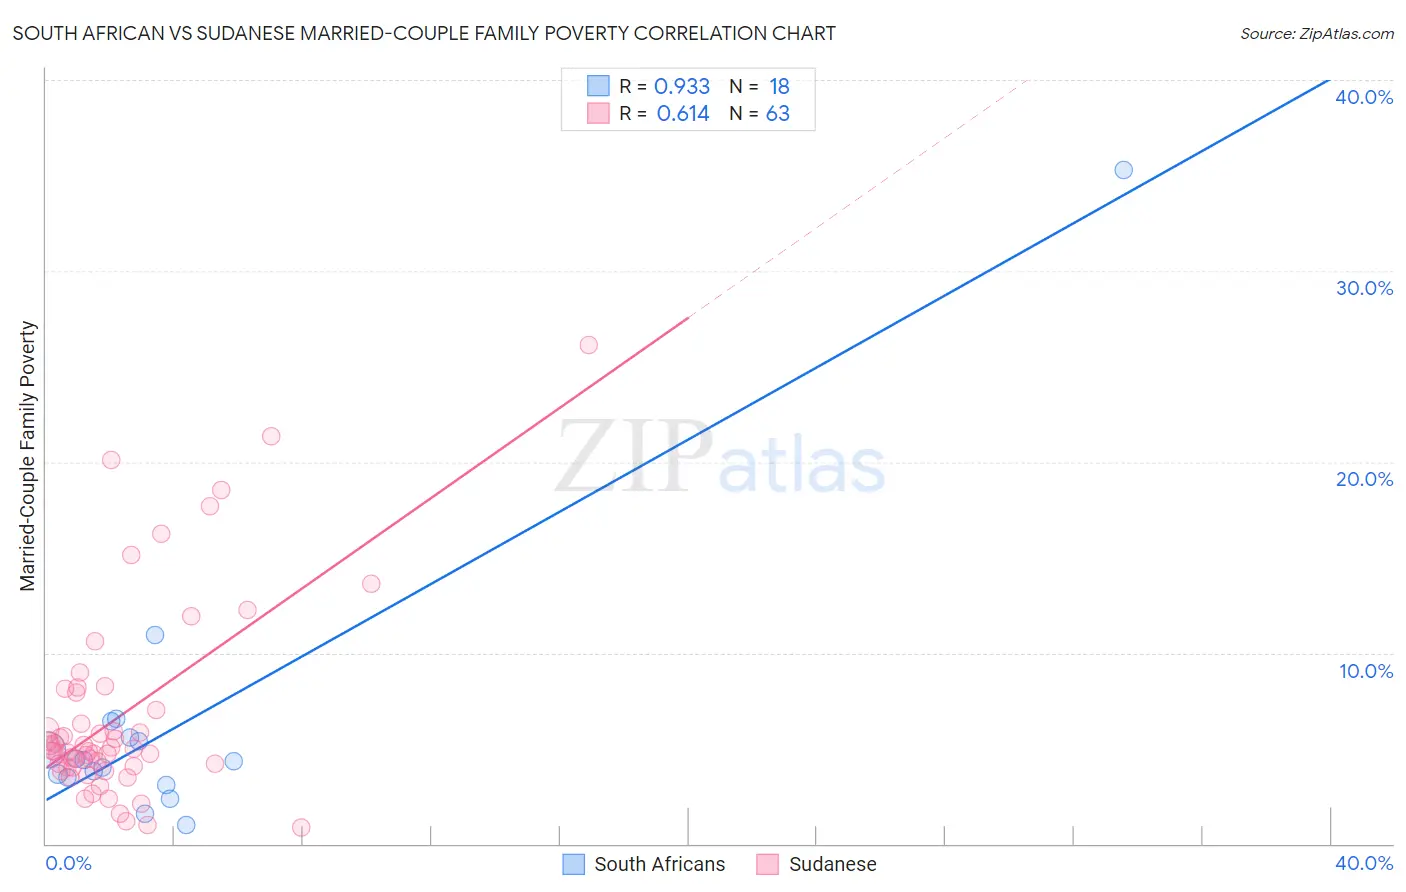 South African vs Sudanese Married-Couple Family Poverty